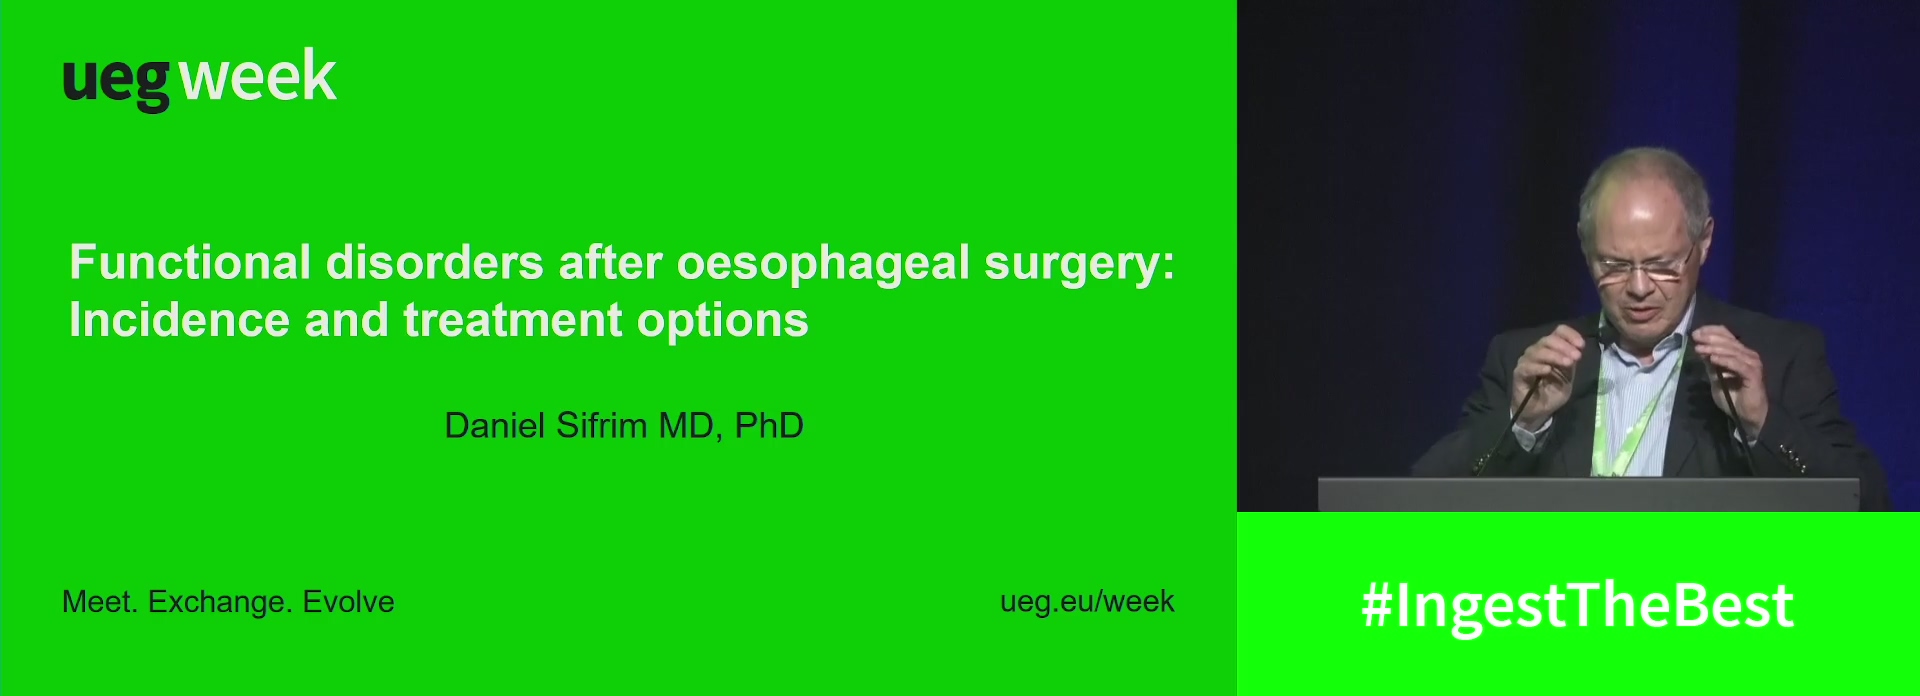 Functional disorders after oesophageal surgery: Incidence and treatment options